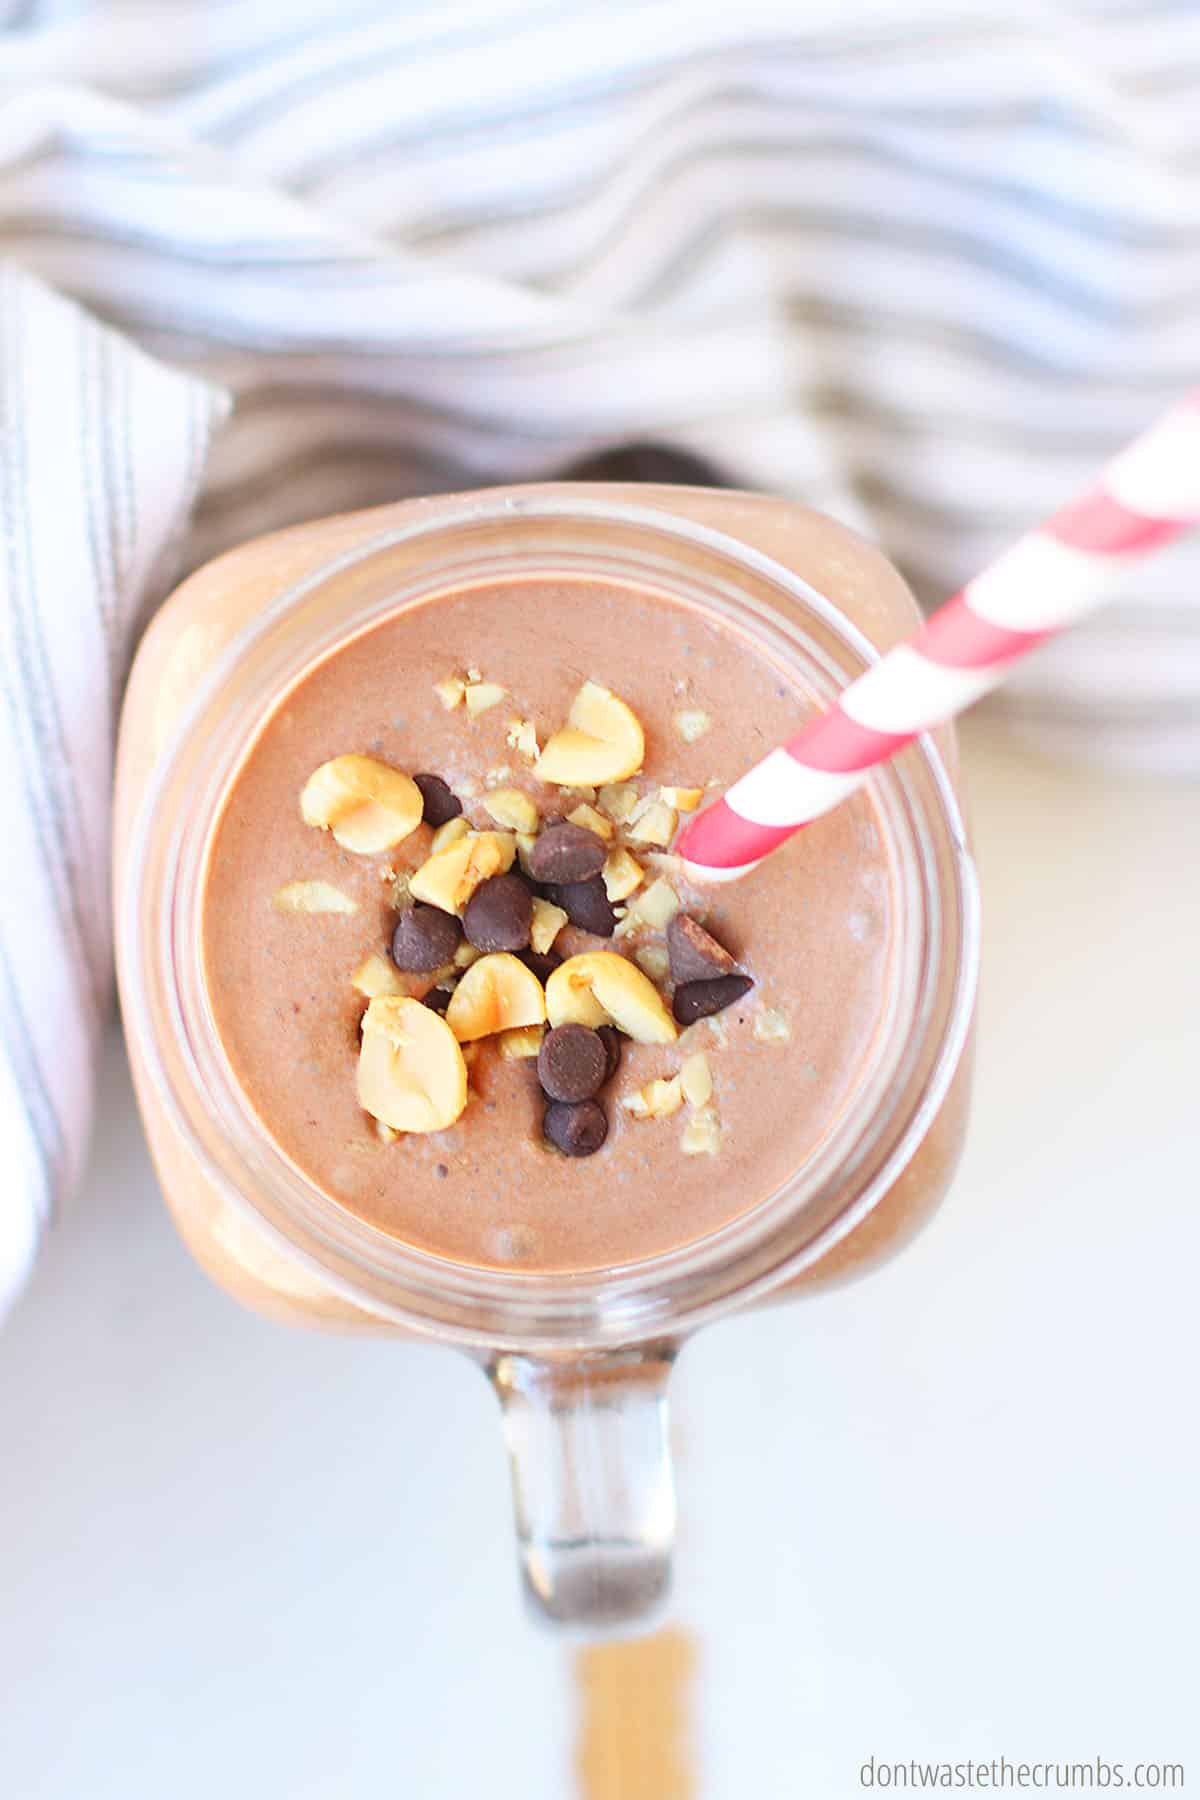 Looking straight down at the top of a peanut butter chocolate smoothie in a glass jar with a red and white striped straw. Garnished with chopped peanuts and chocolate chips.